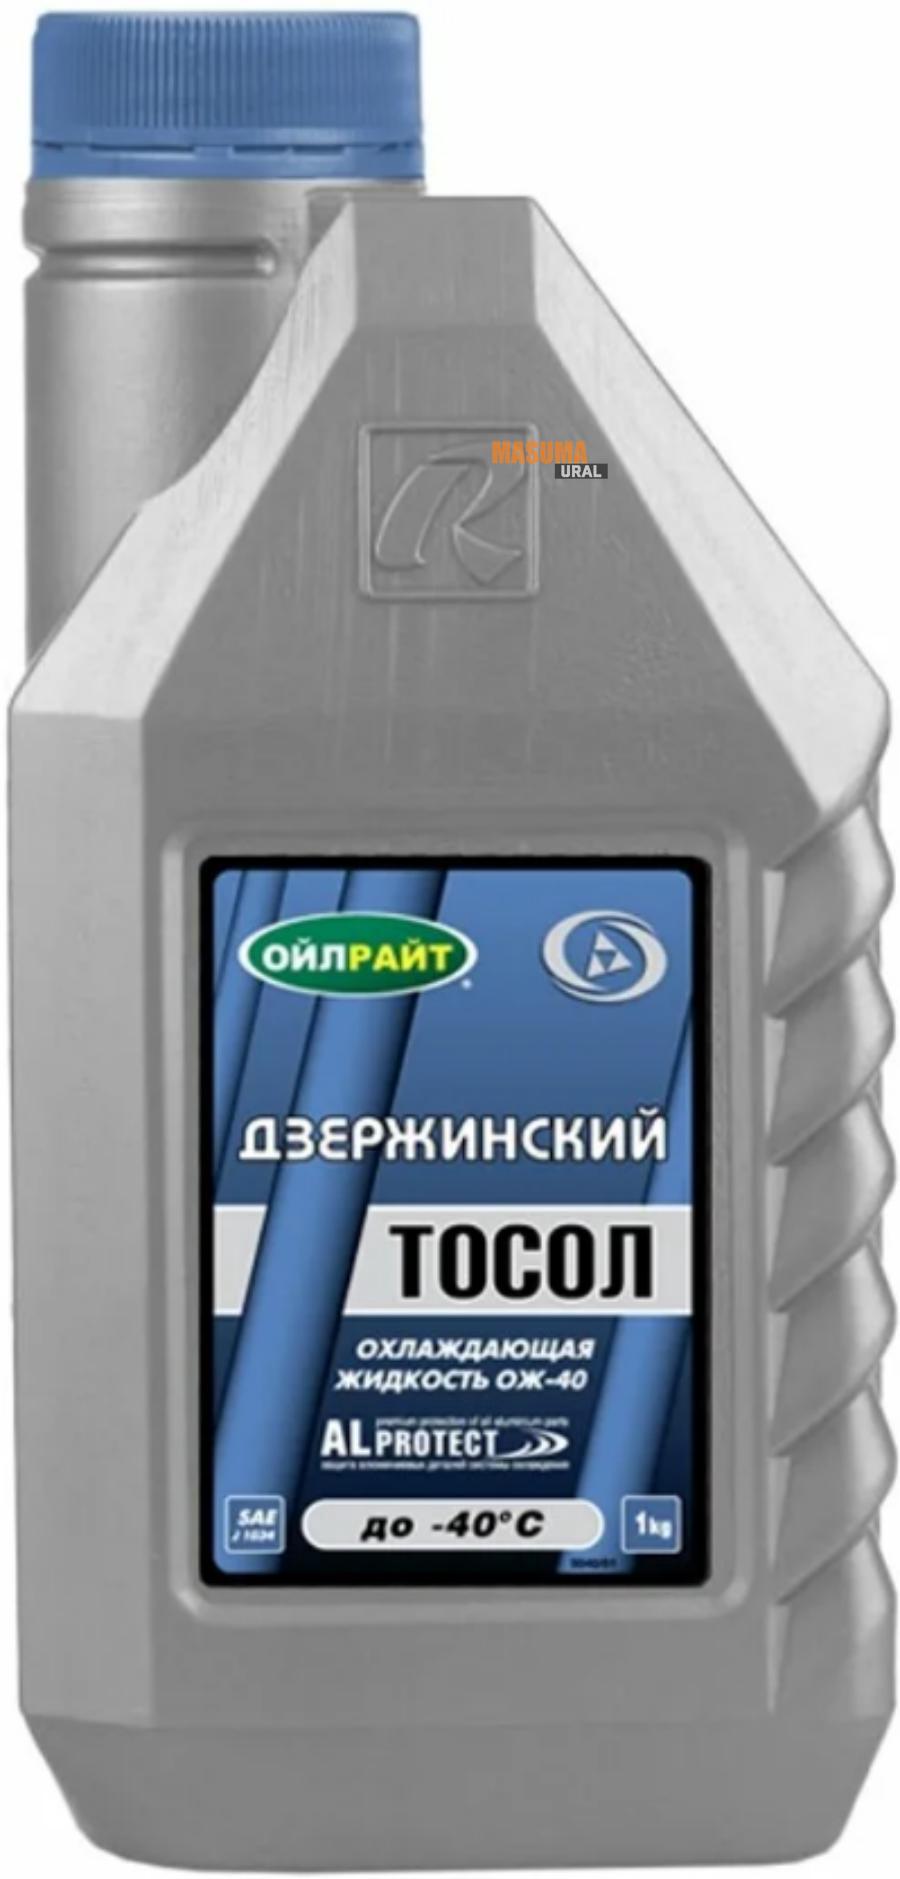 5040 OIL RIGHT Тосол ож-40 дзержинский, 1 кг,